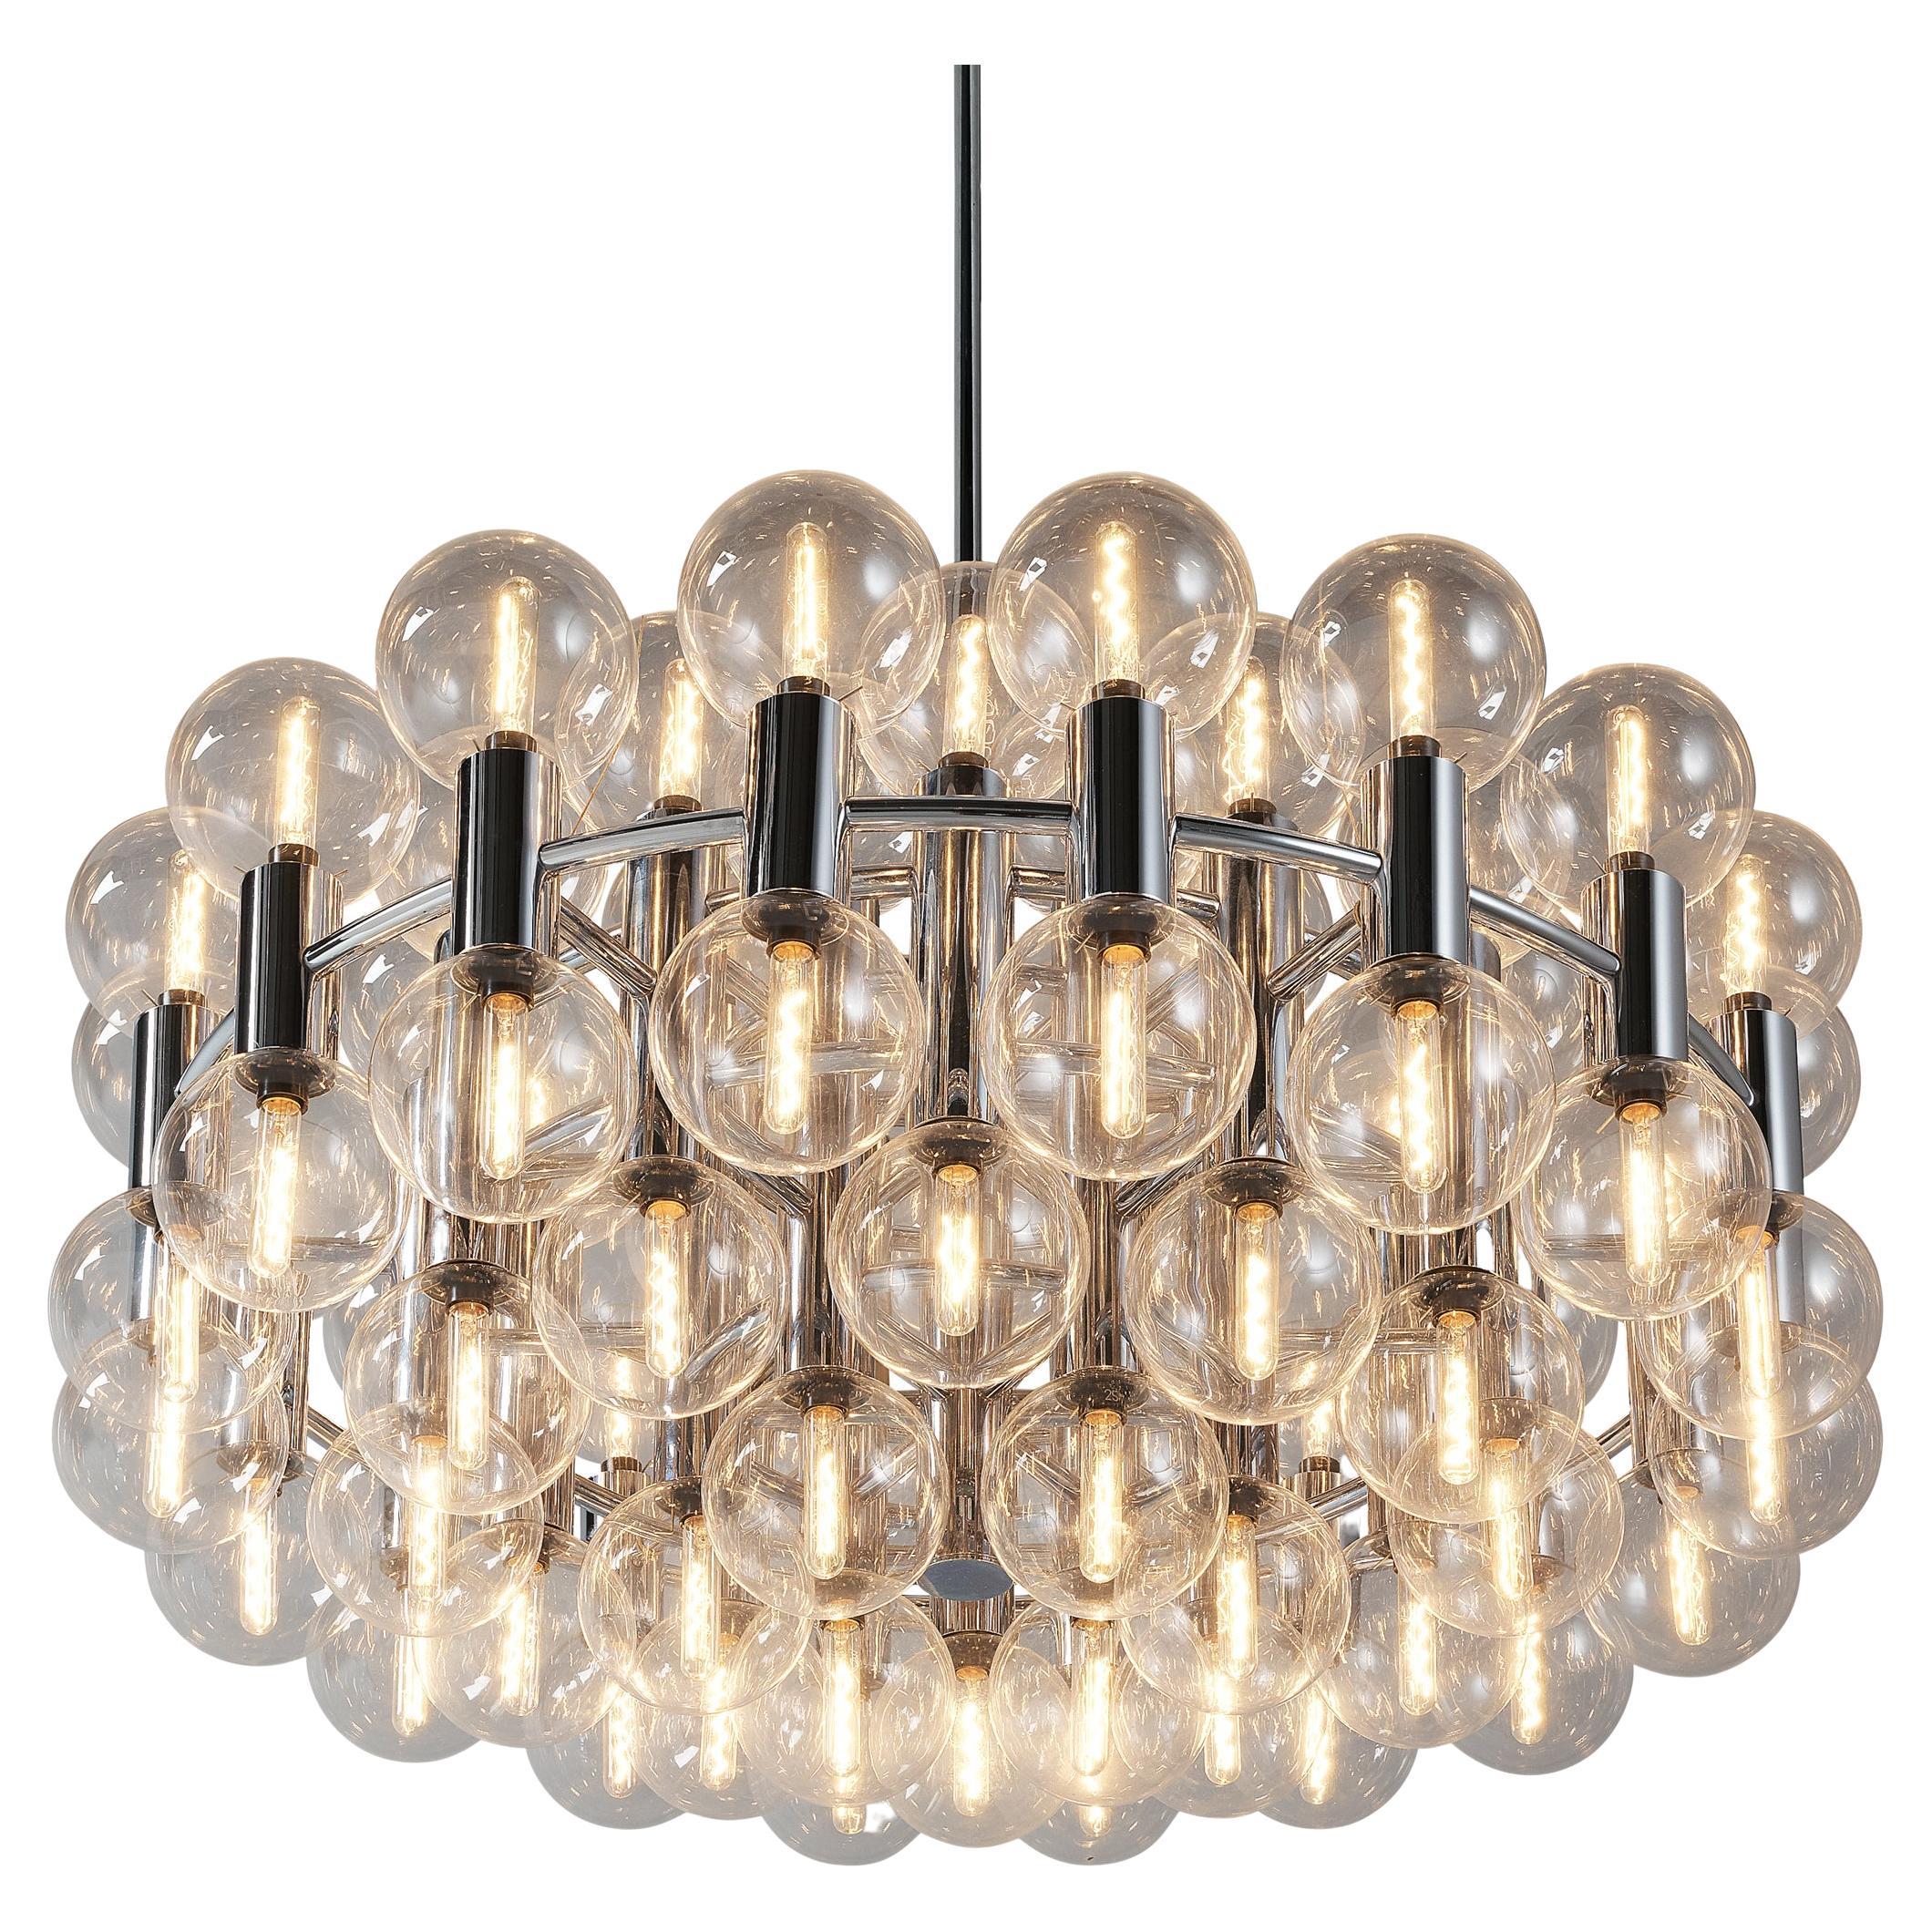  Motoko Ishii for Staff Leuchten Large Chandelier in Chrome with 72 Glass Orbs